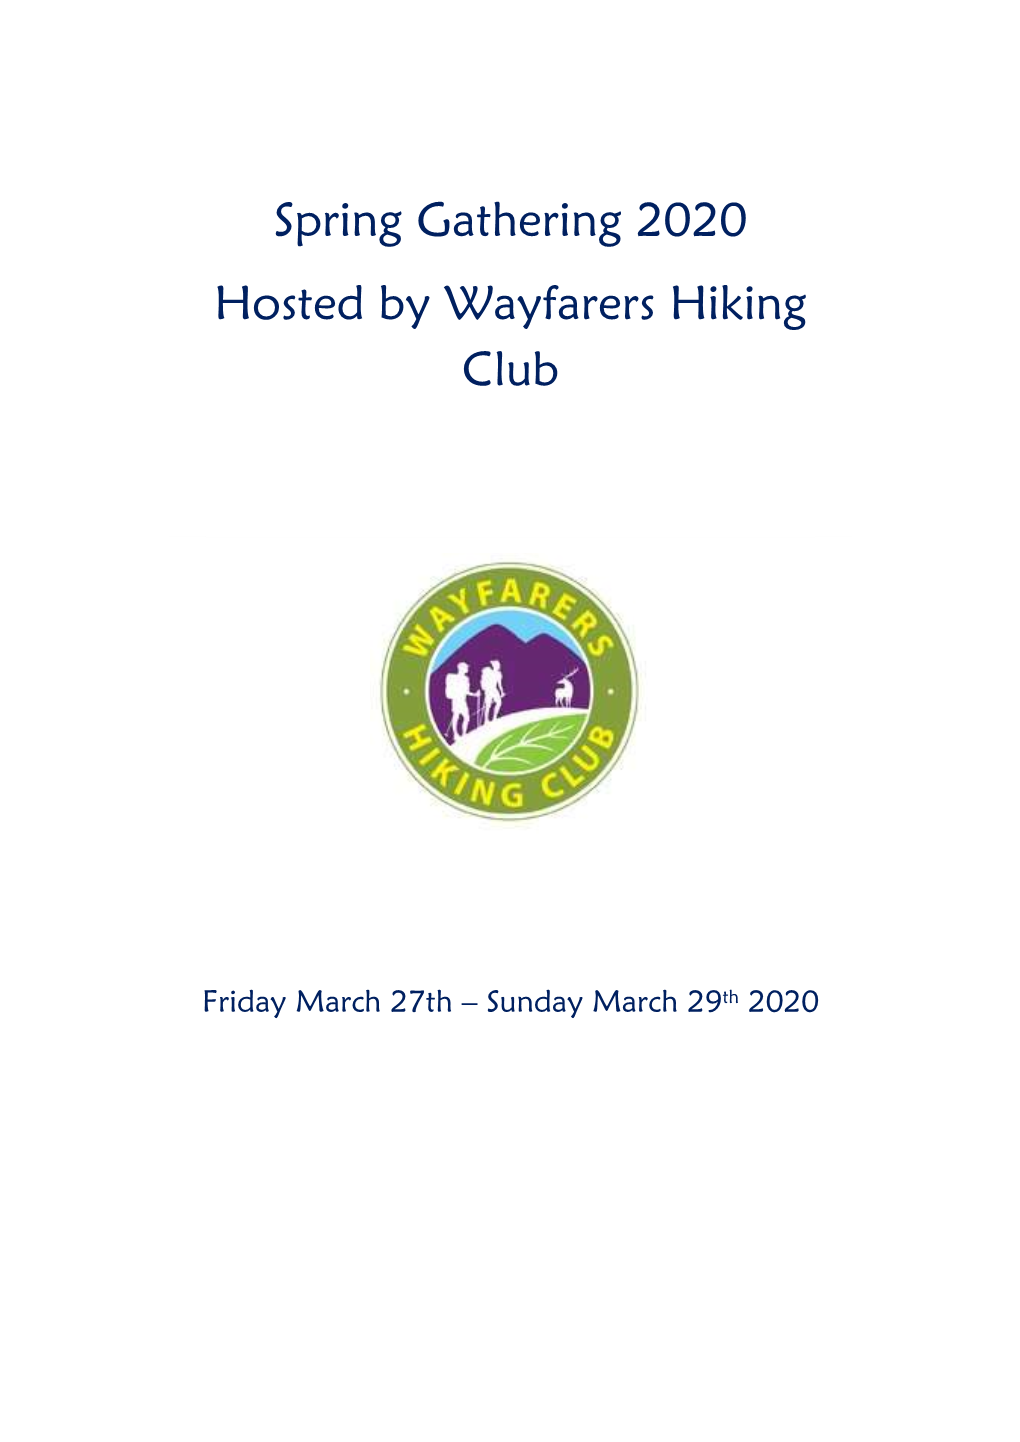 Spring Gathering 2020 Hosted by Wayfarers Hiking Club